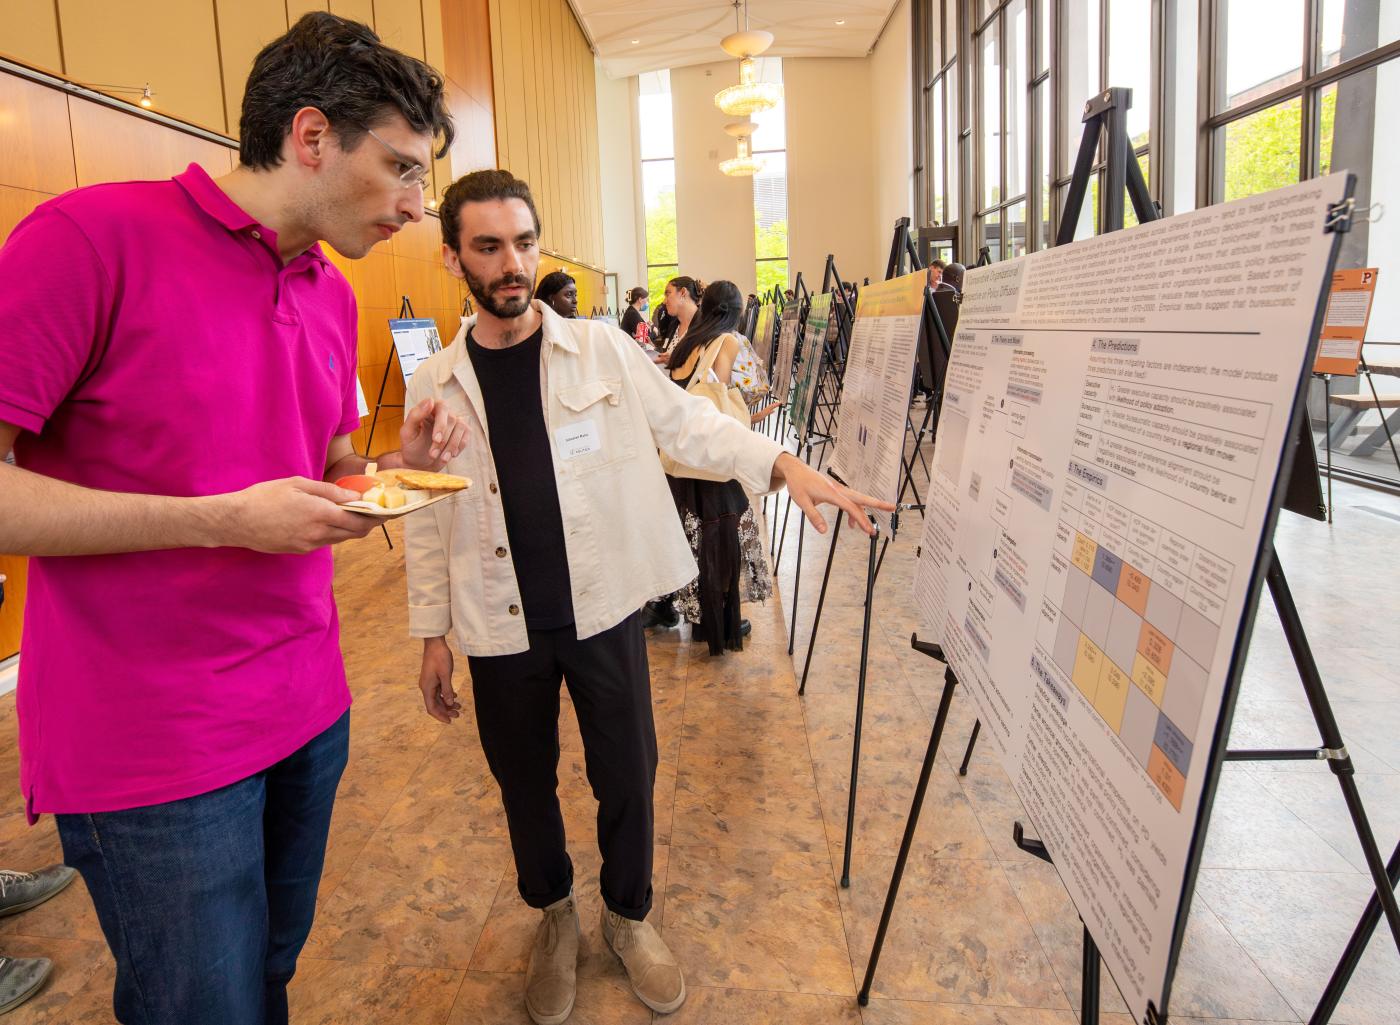 Professor and student looking at research poster